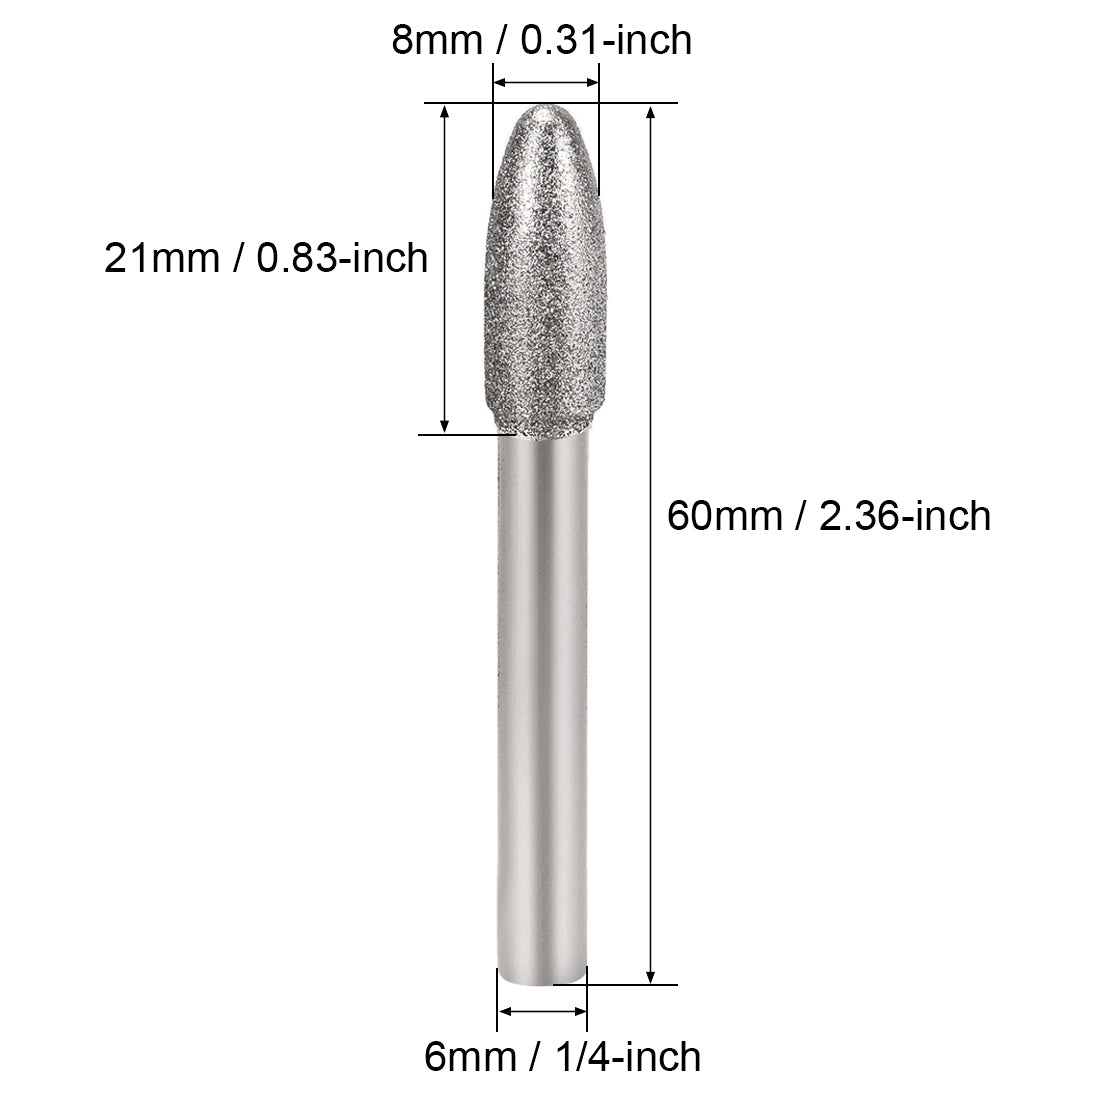 Uxcell Uxcell Diamond Burrs Grinding Drill Bits for Carving Rotary Tool 1/4-Inch Shank 8mm Tapered 150 Grit 2 Pcs